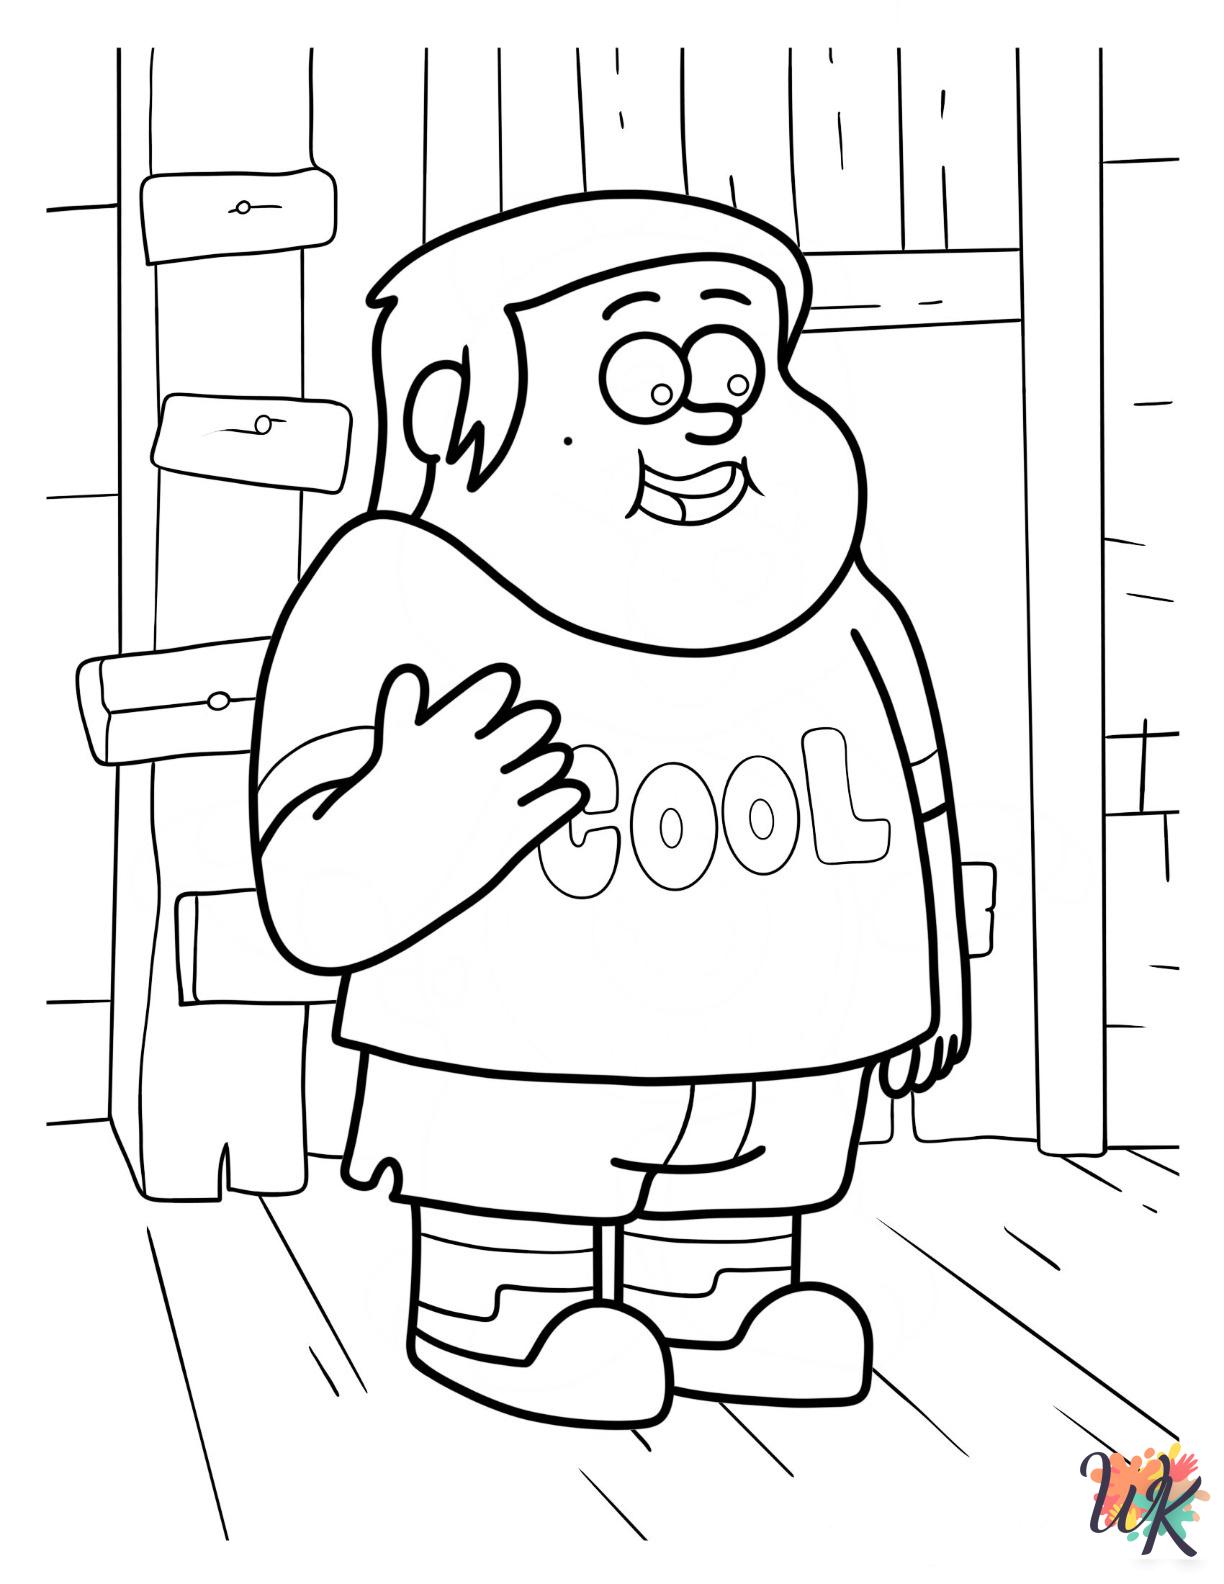 Gravity Falls printable coloring pages